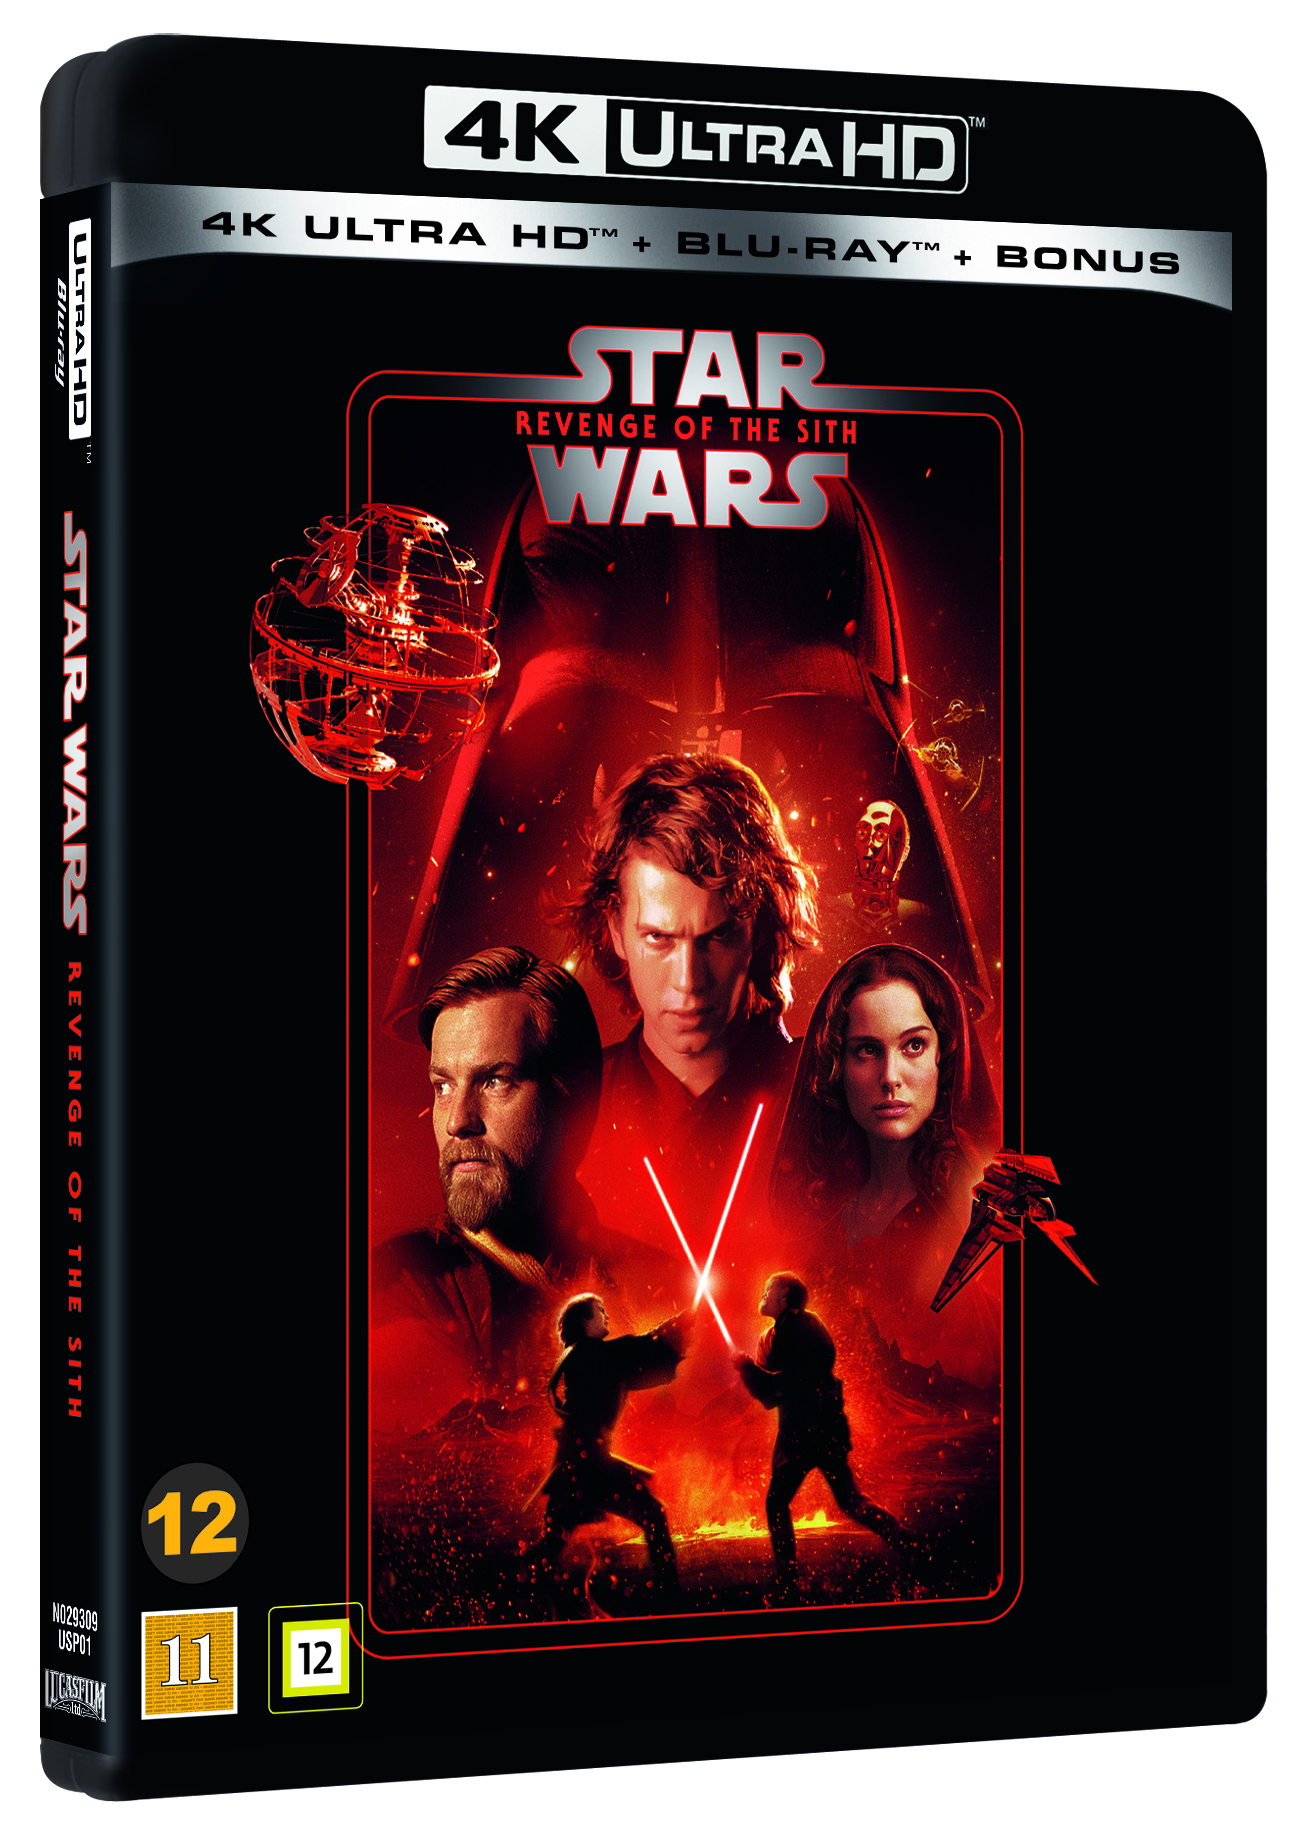 Star Wars Ep. III: Revenge of the Sith download the new version for android